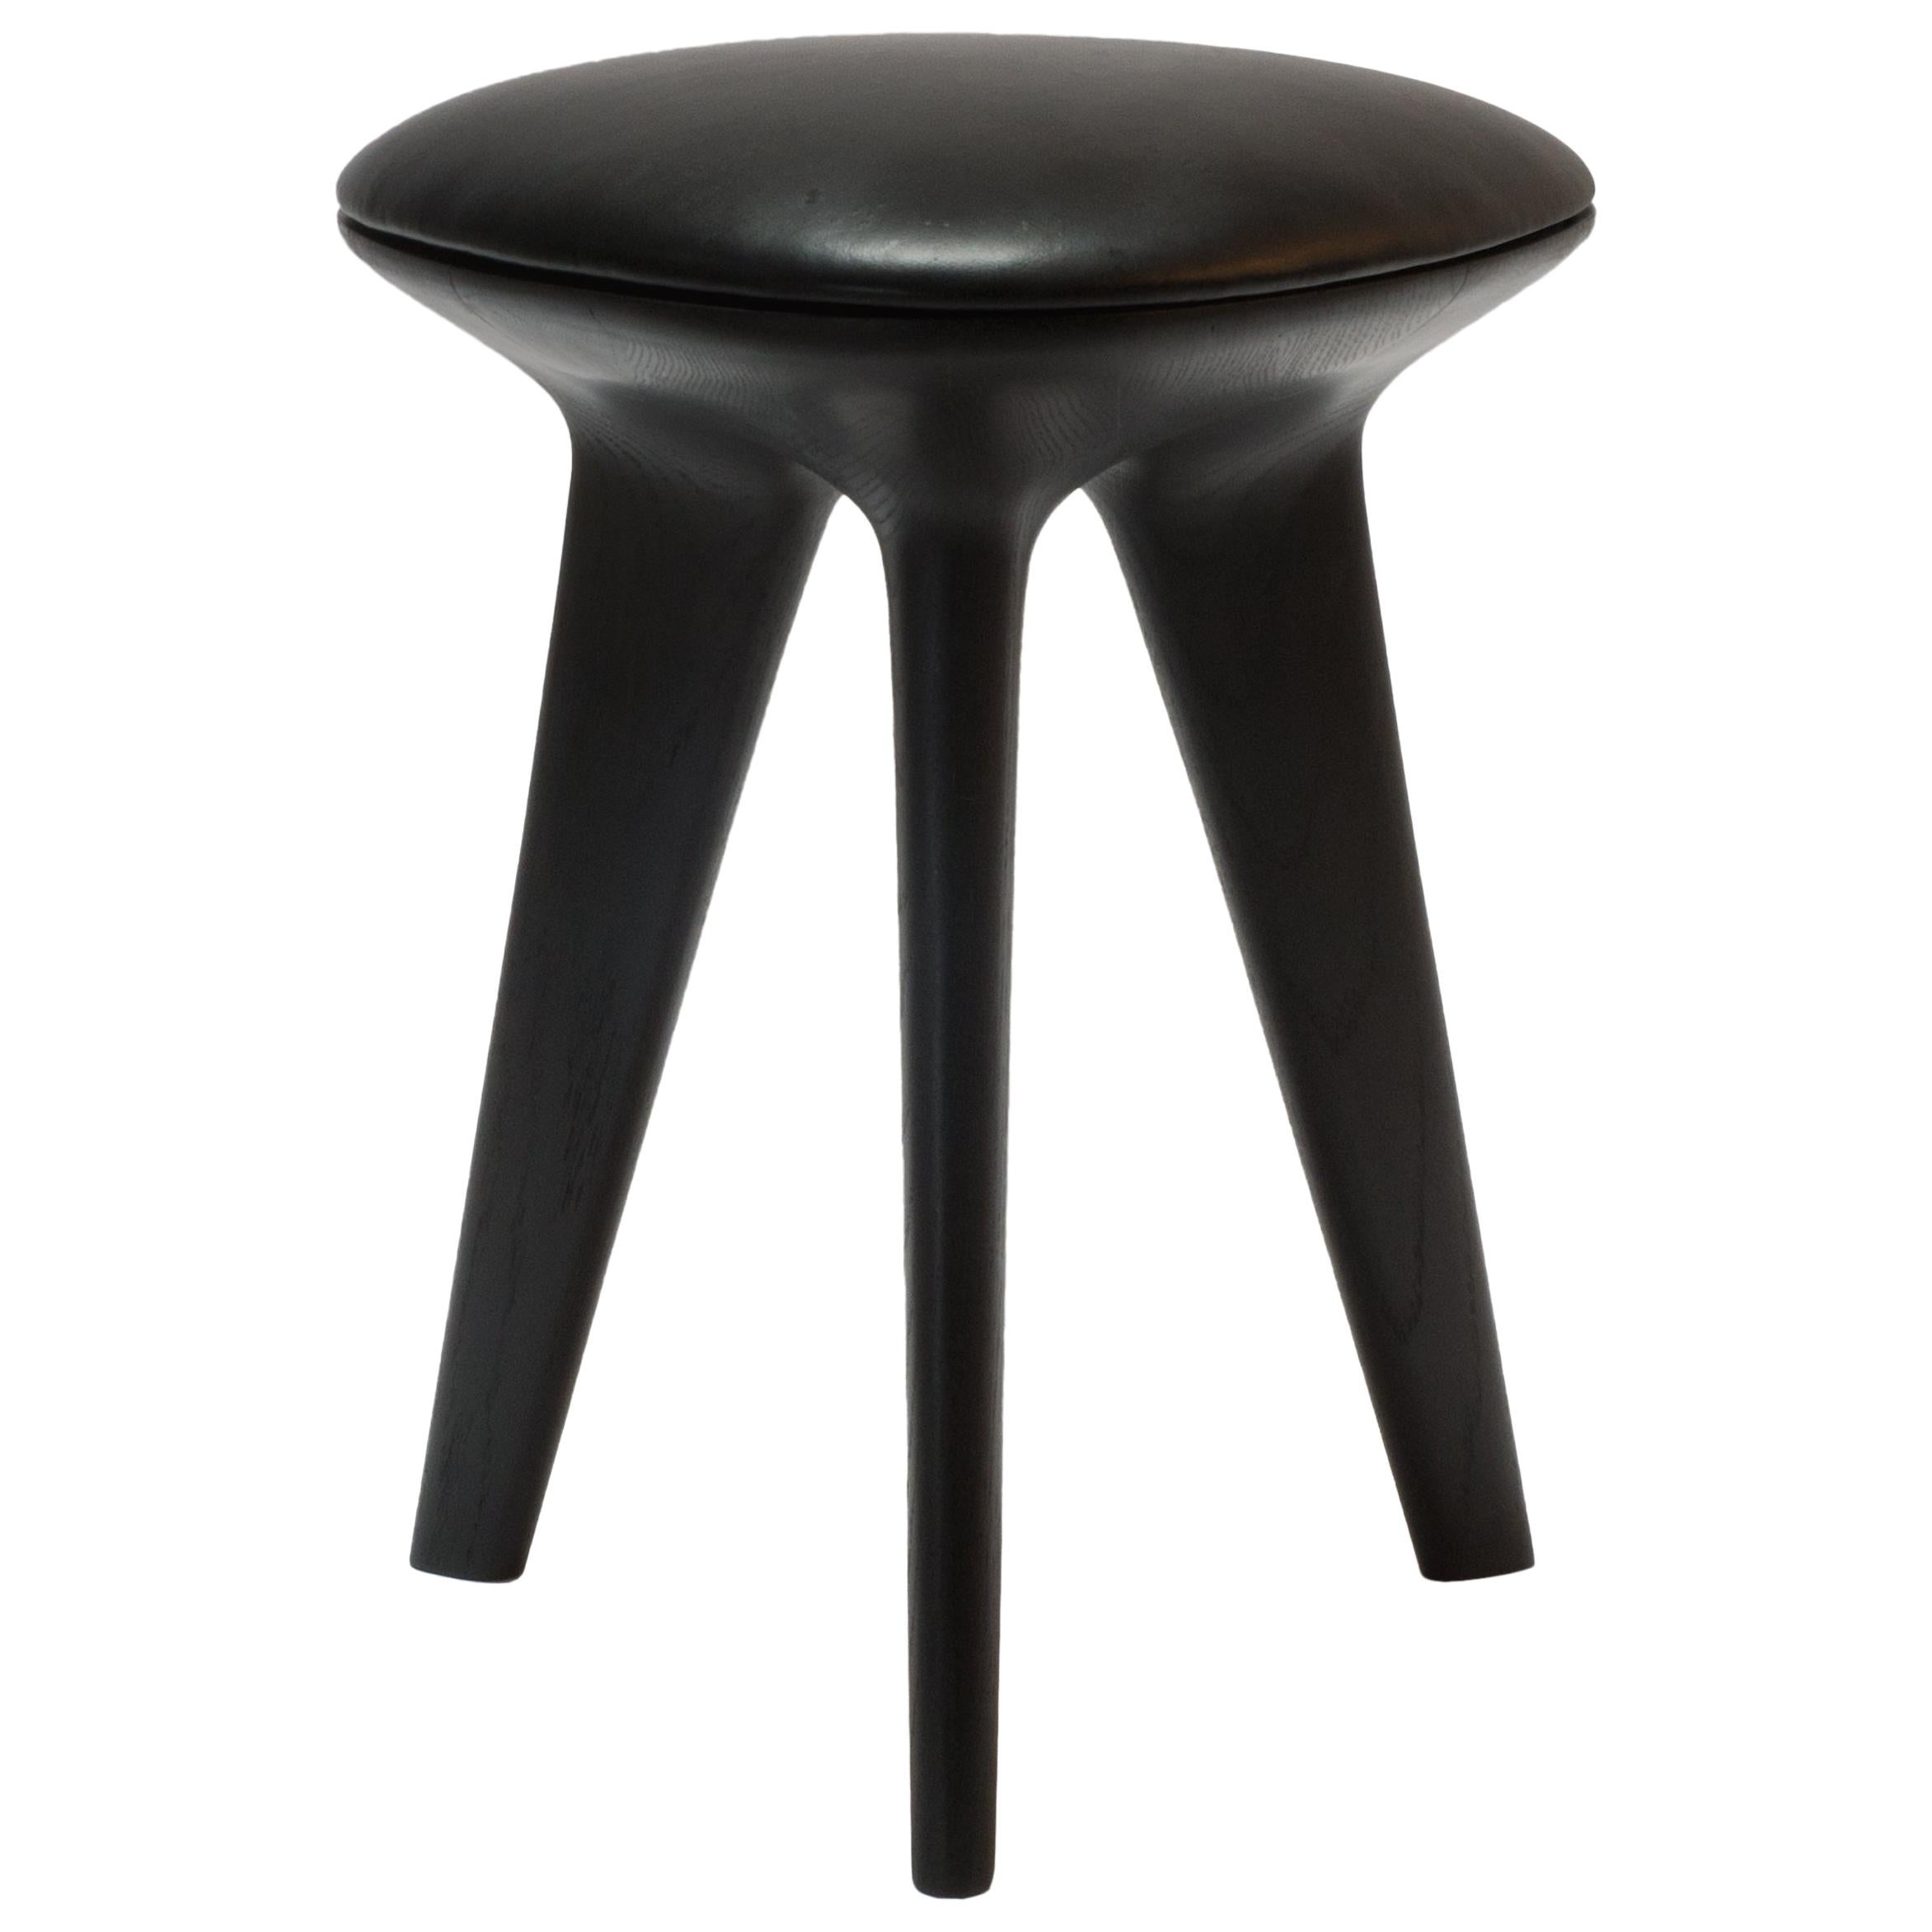 Rotor, Solid Black Oak Stool with Black Padded Leather Seat by Made in Ratio